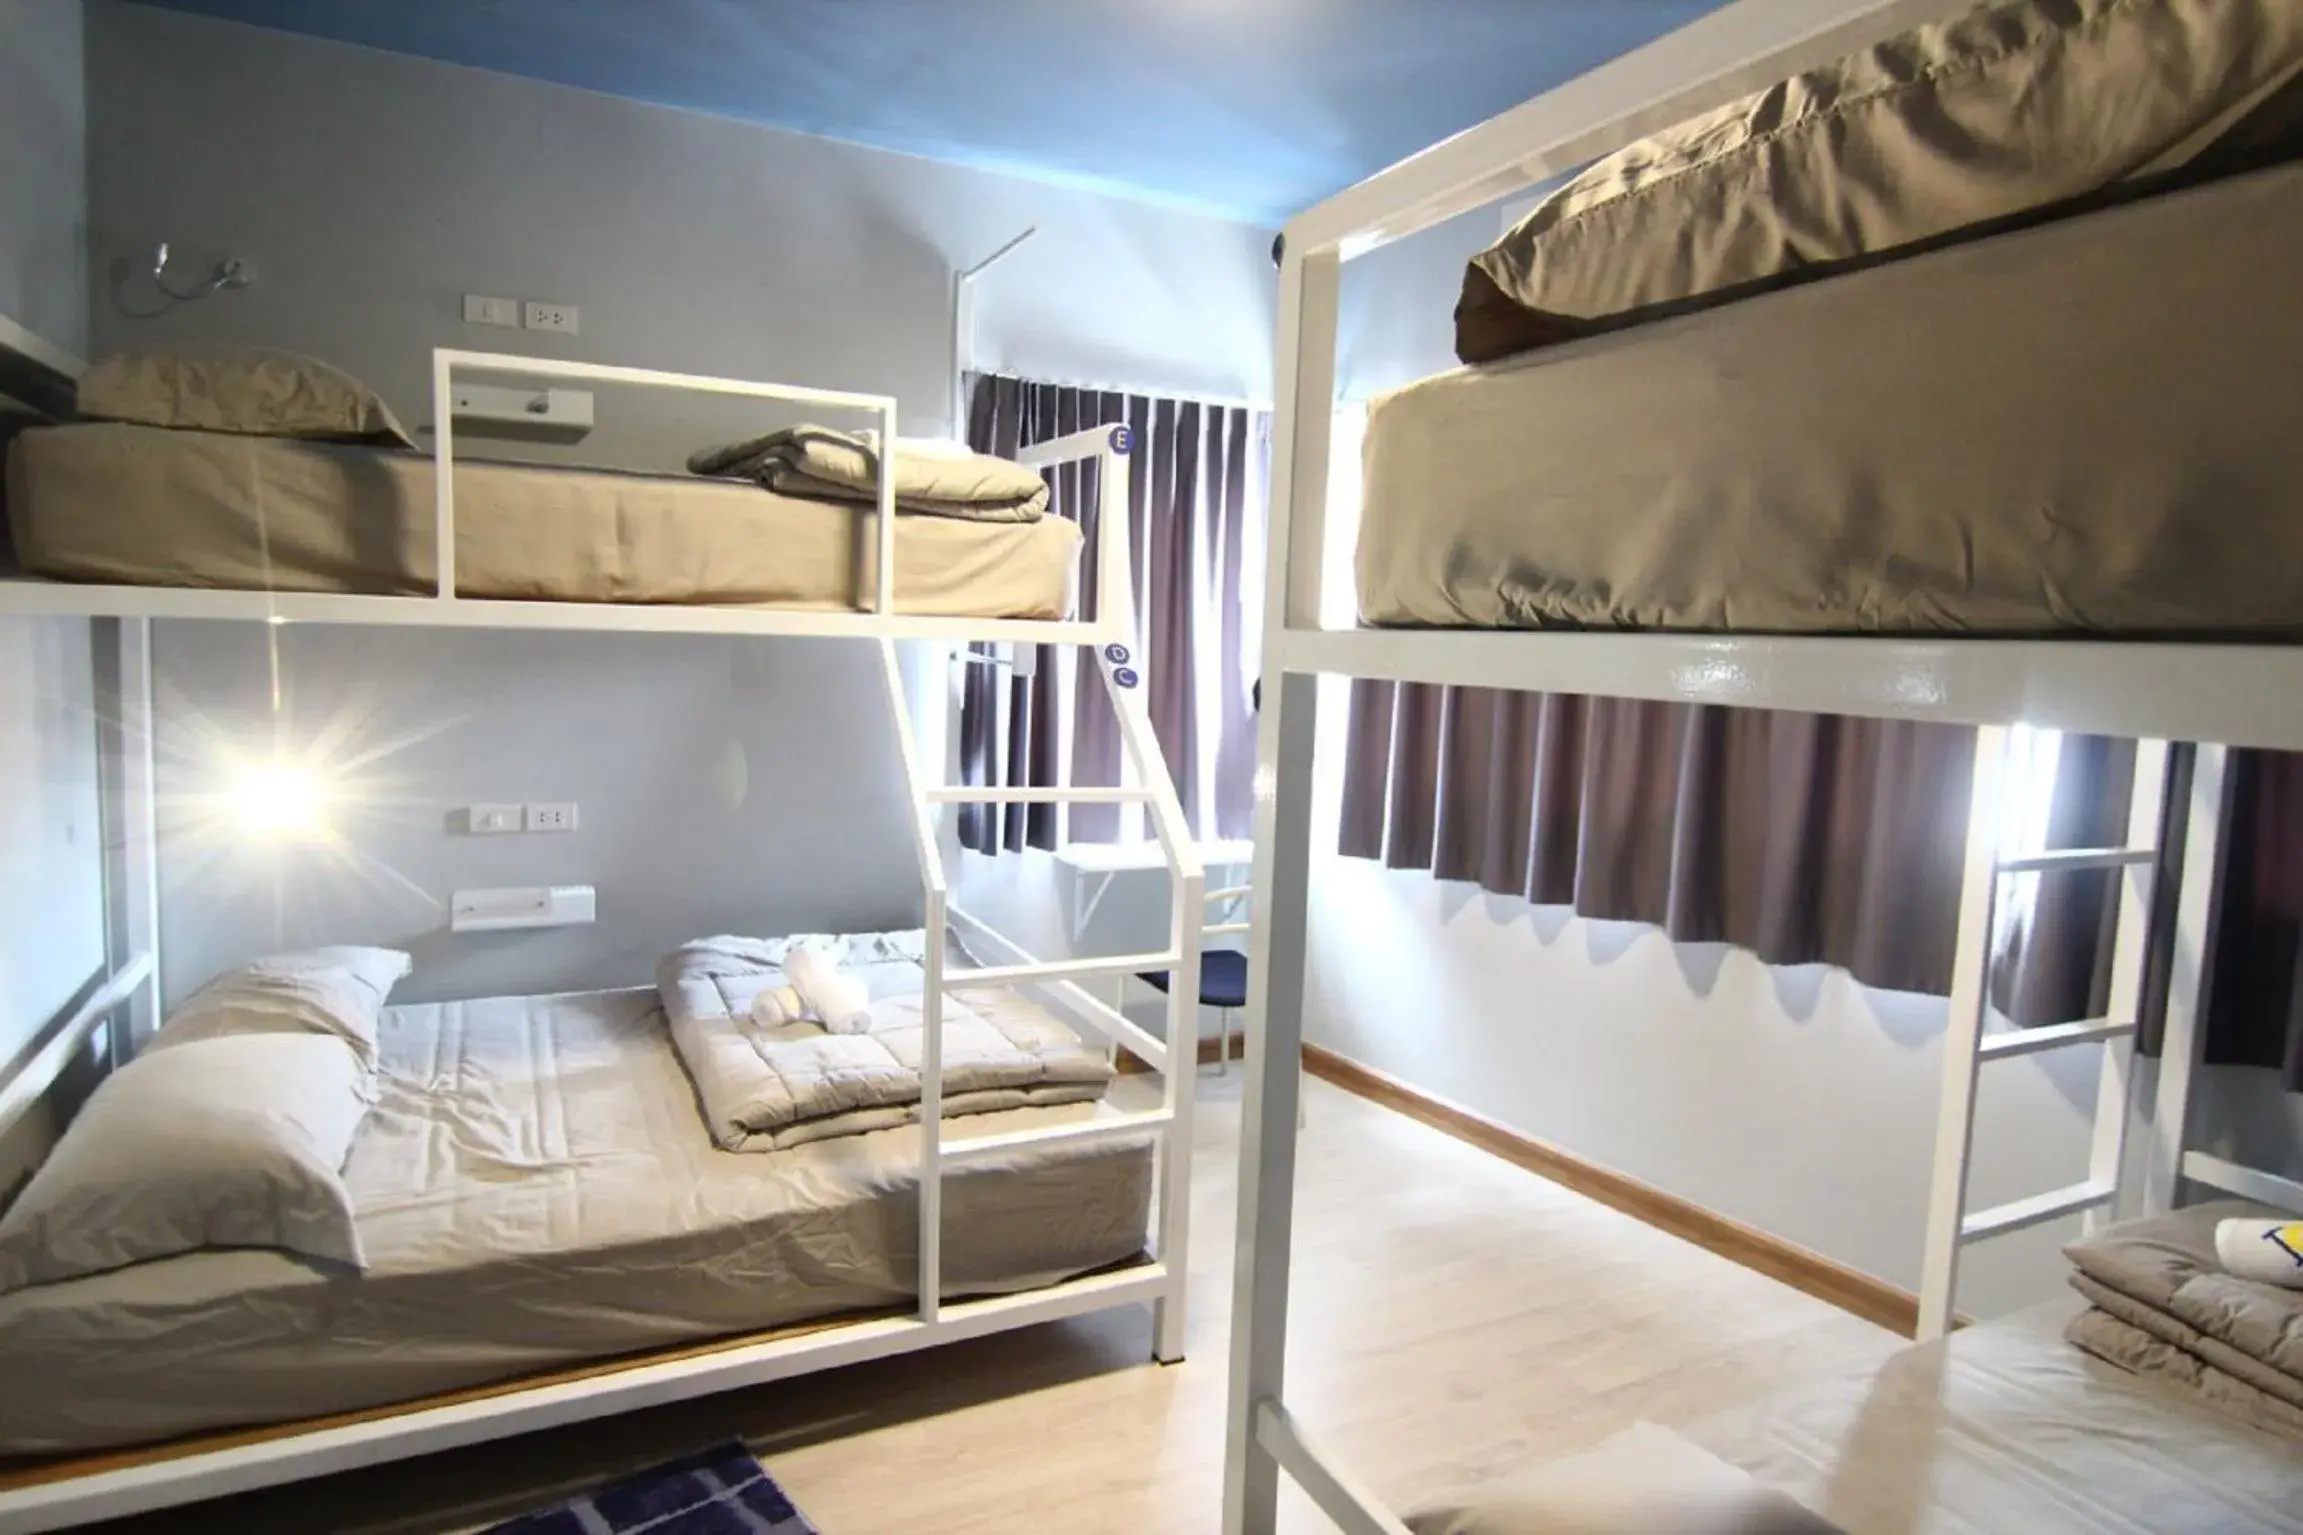 Bunk Bed in The Moon Hostel Huahin